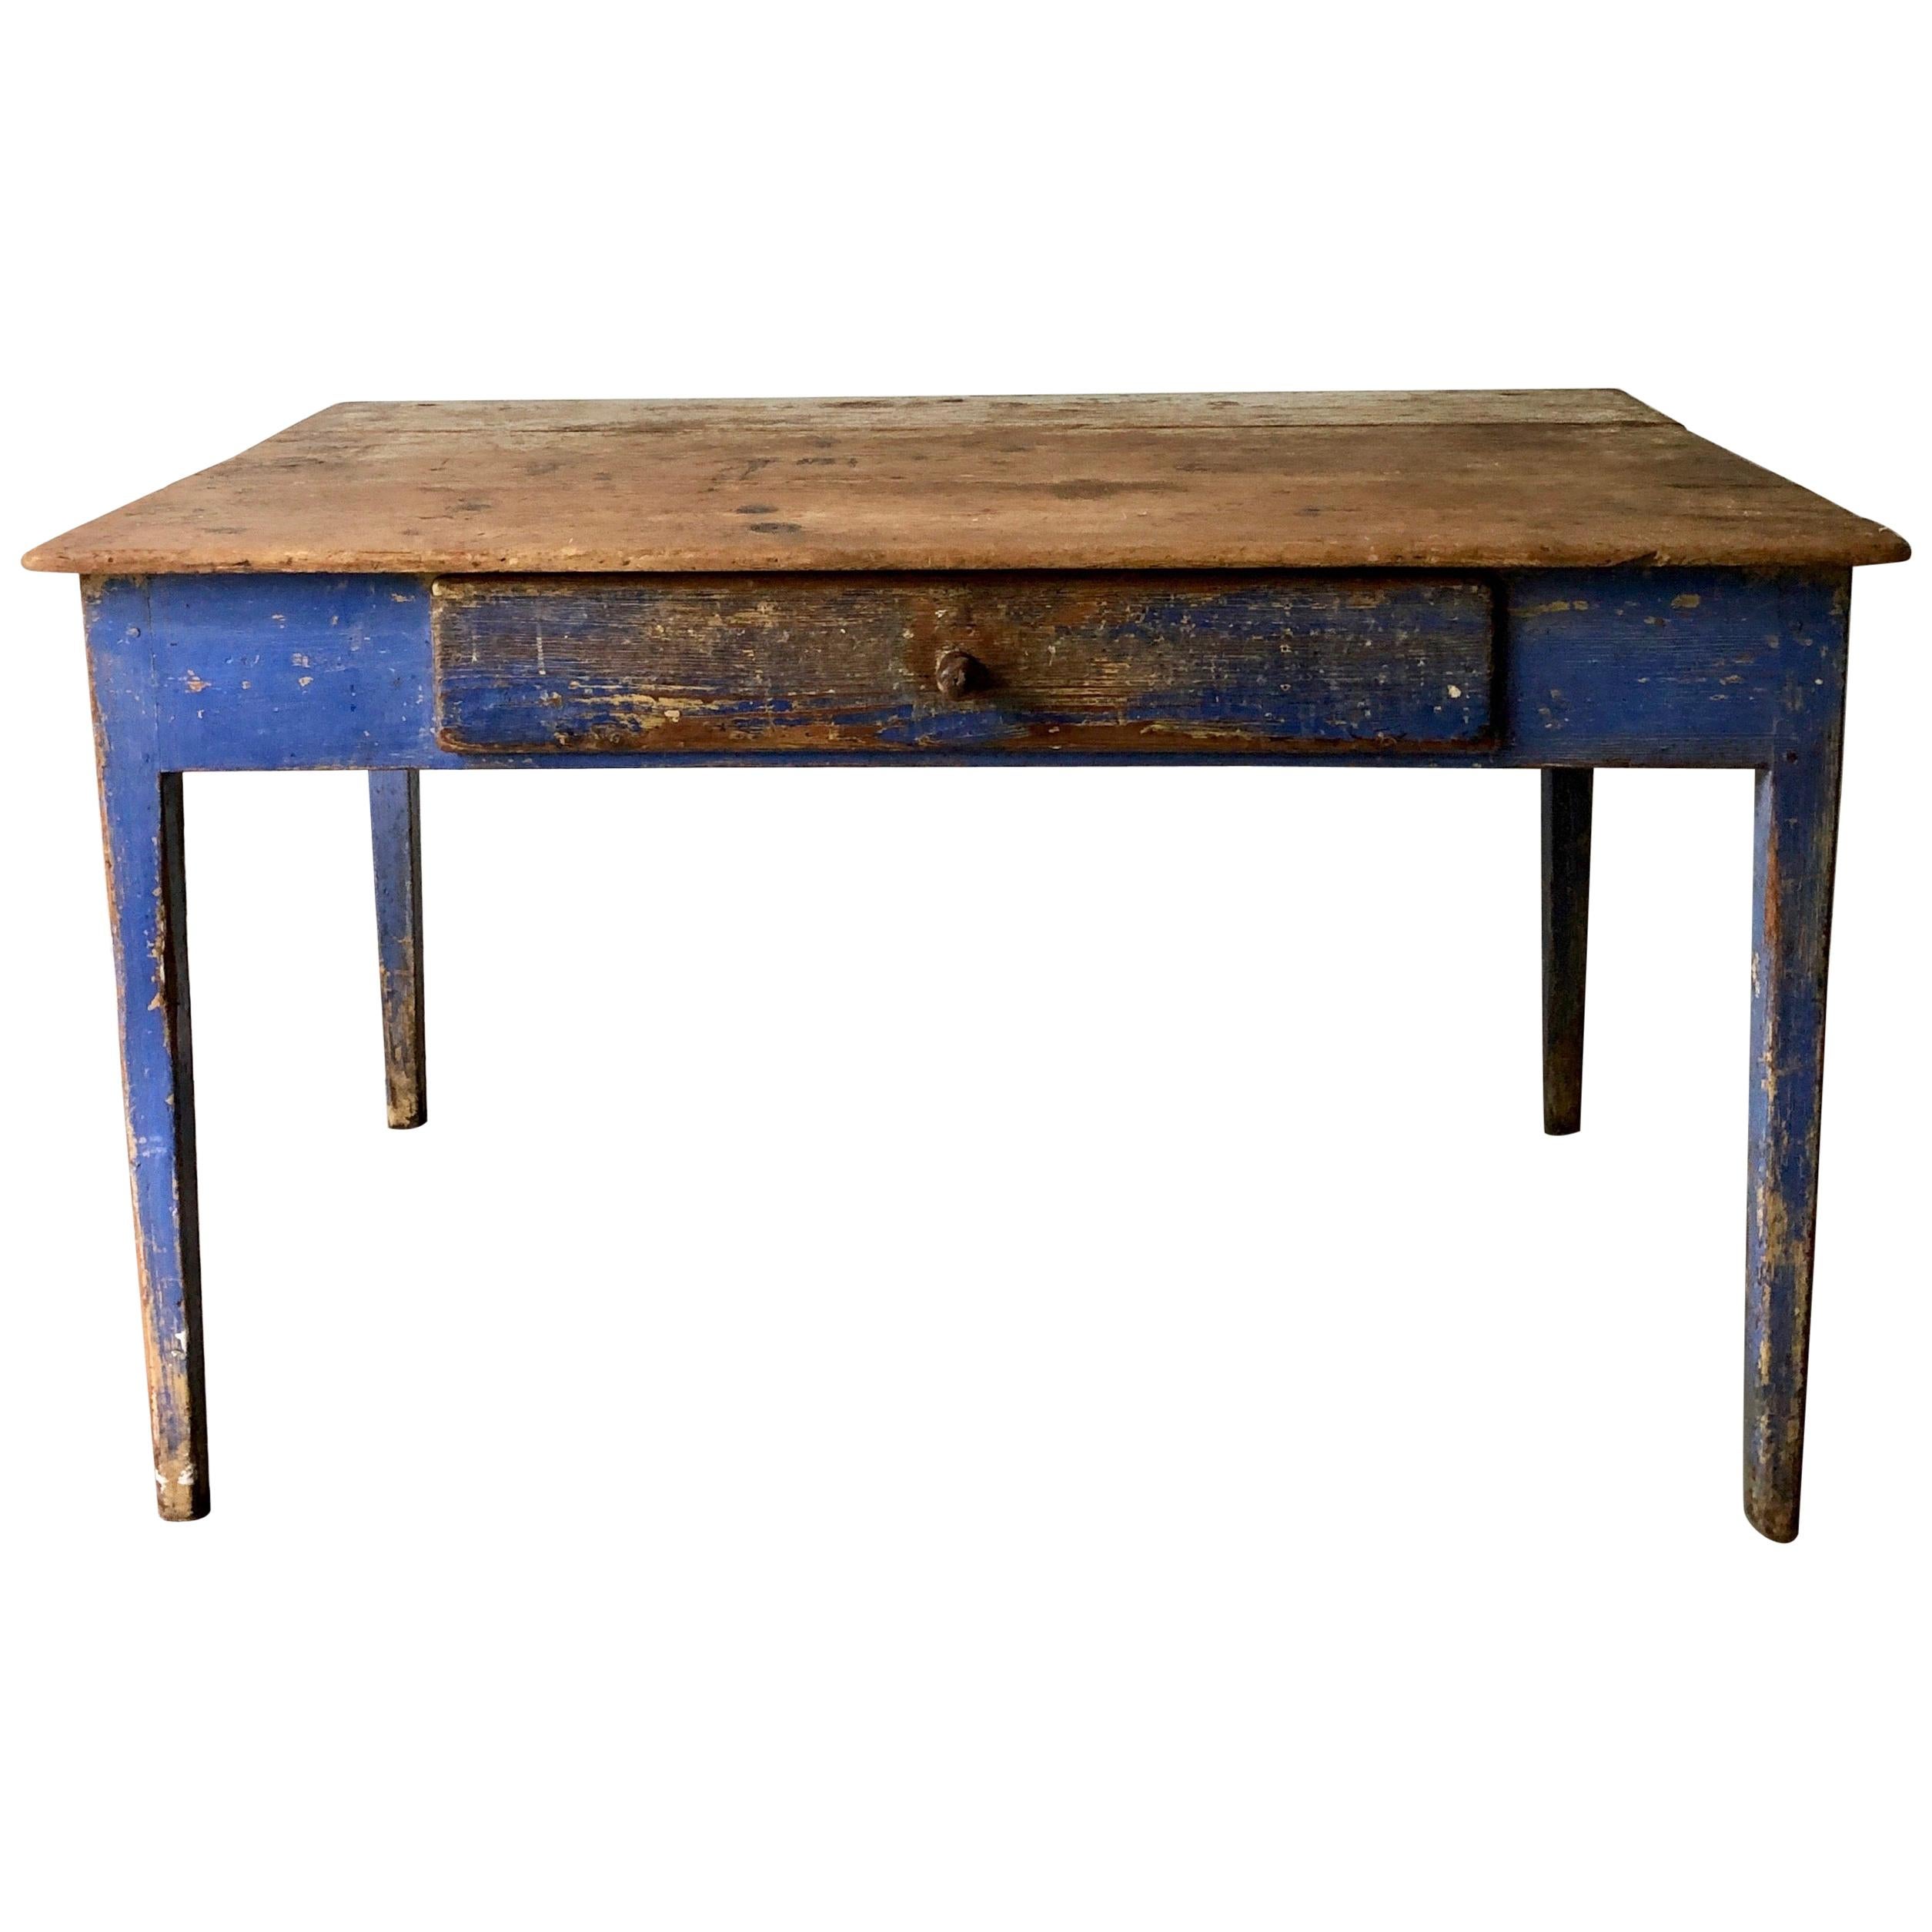 Swedish 19th Century Painted Table or Desk